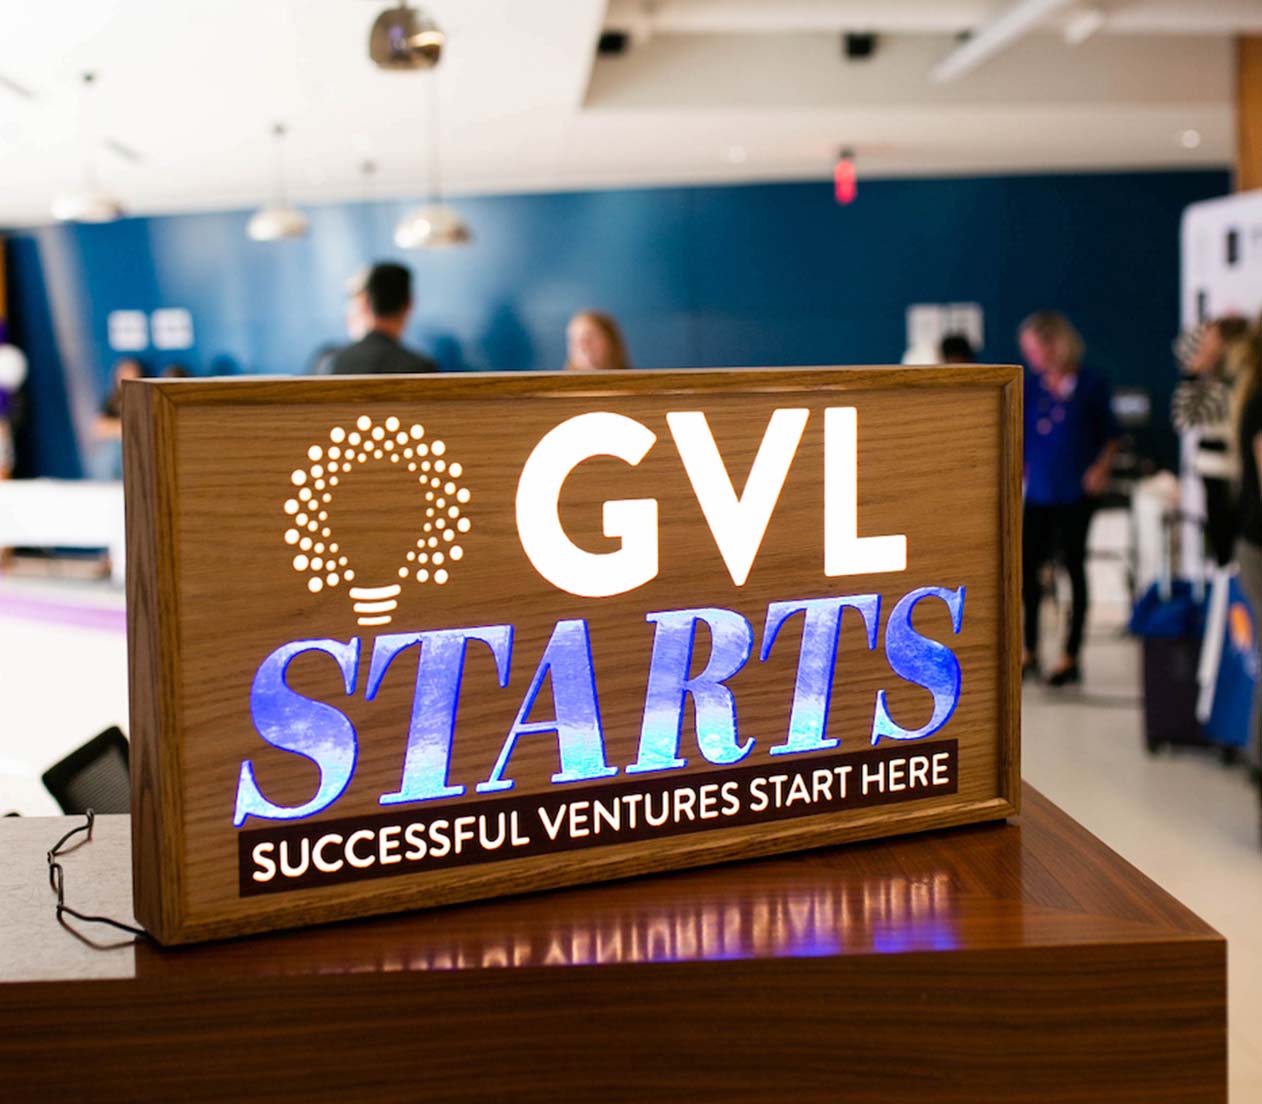 GVL Starts sign on a table in a room full of people